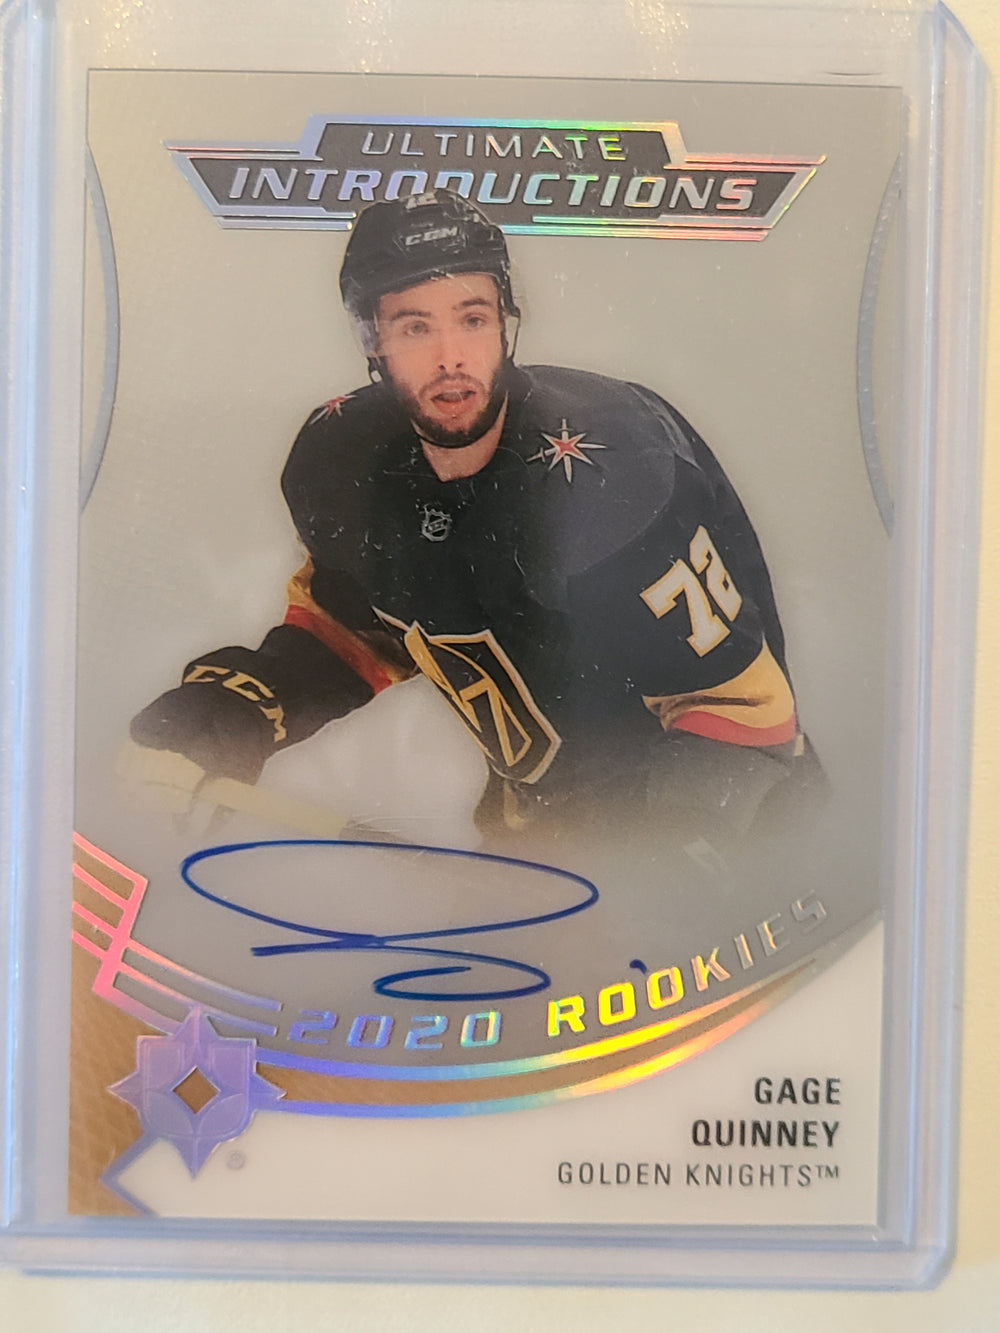 2020-21 Ultimate Introductions Auto #UI-27 Gage Quinney Vegas Golden Knights